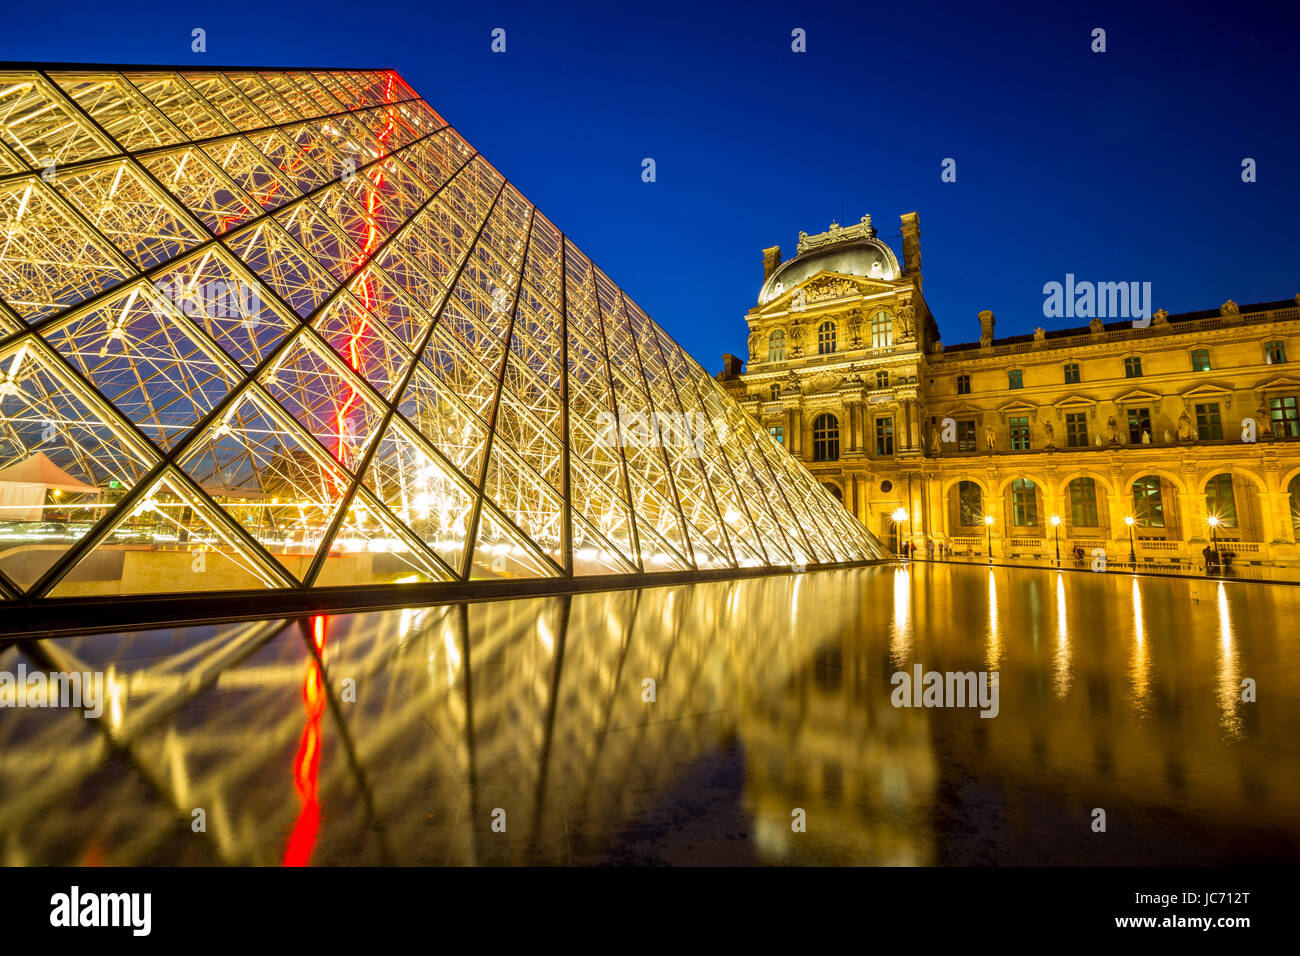 Paris - June 18: Louvre museum at dusk on June 18, 2014 in Paris. This is one of the most popular tourist destinations in France displayed over 60,000 square meters of exhibition space. Stock Photo